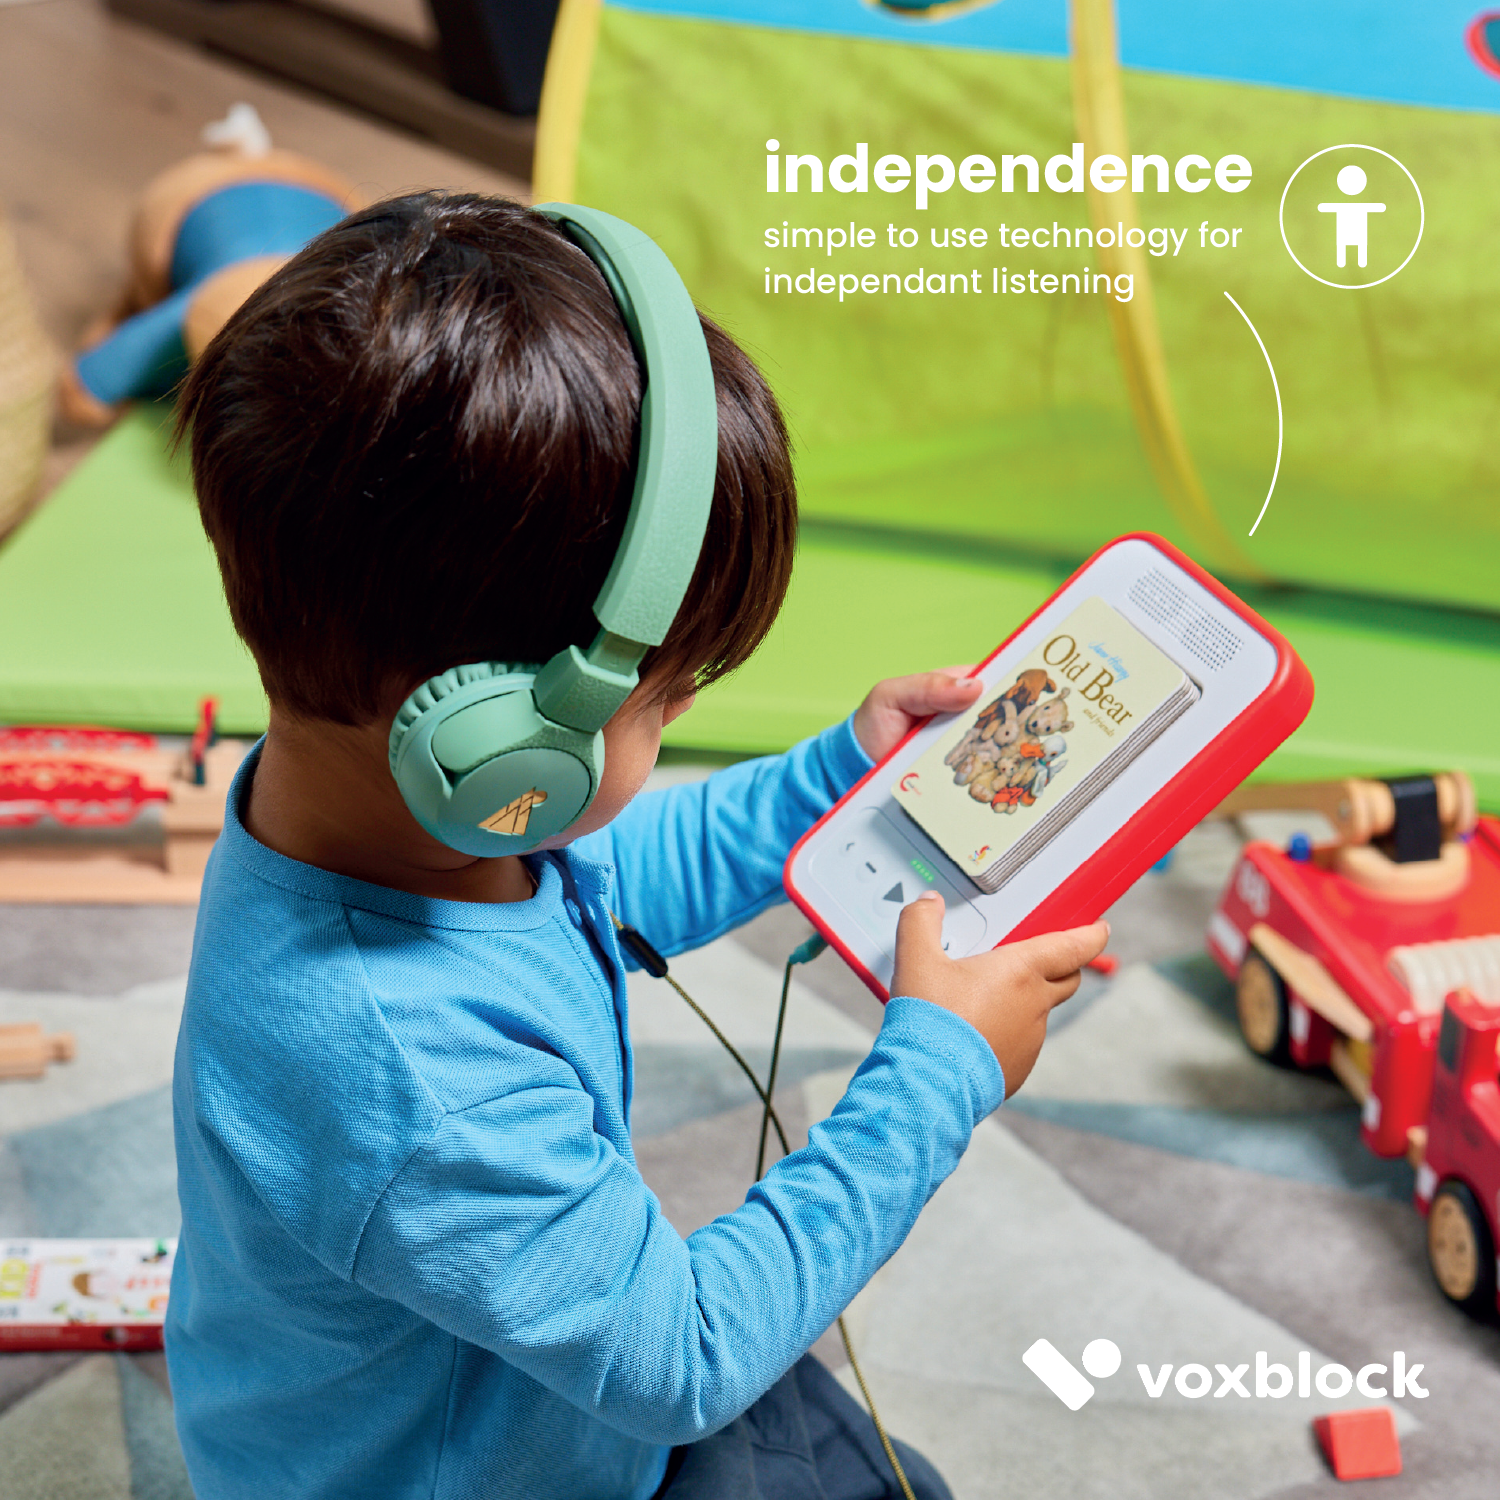 One advantage of Voxblock is independence of listening